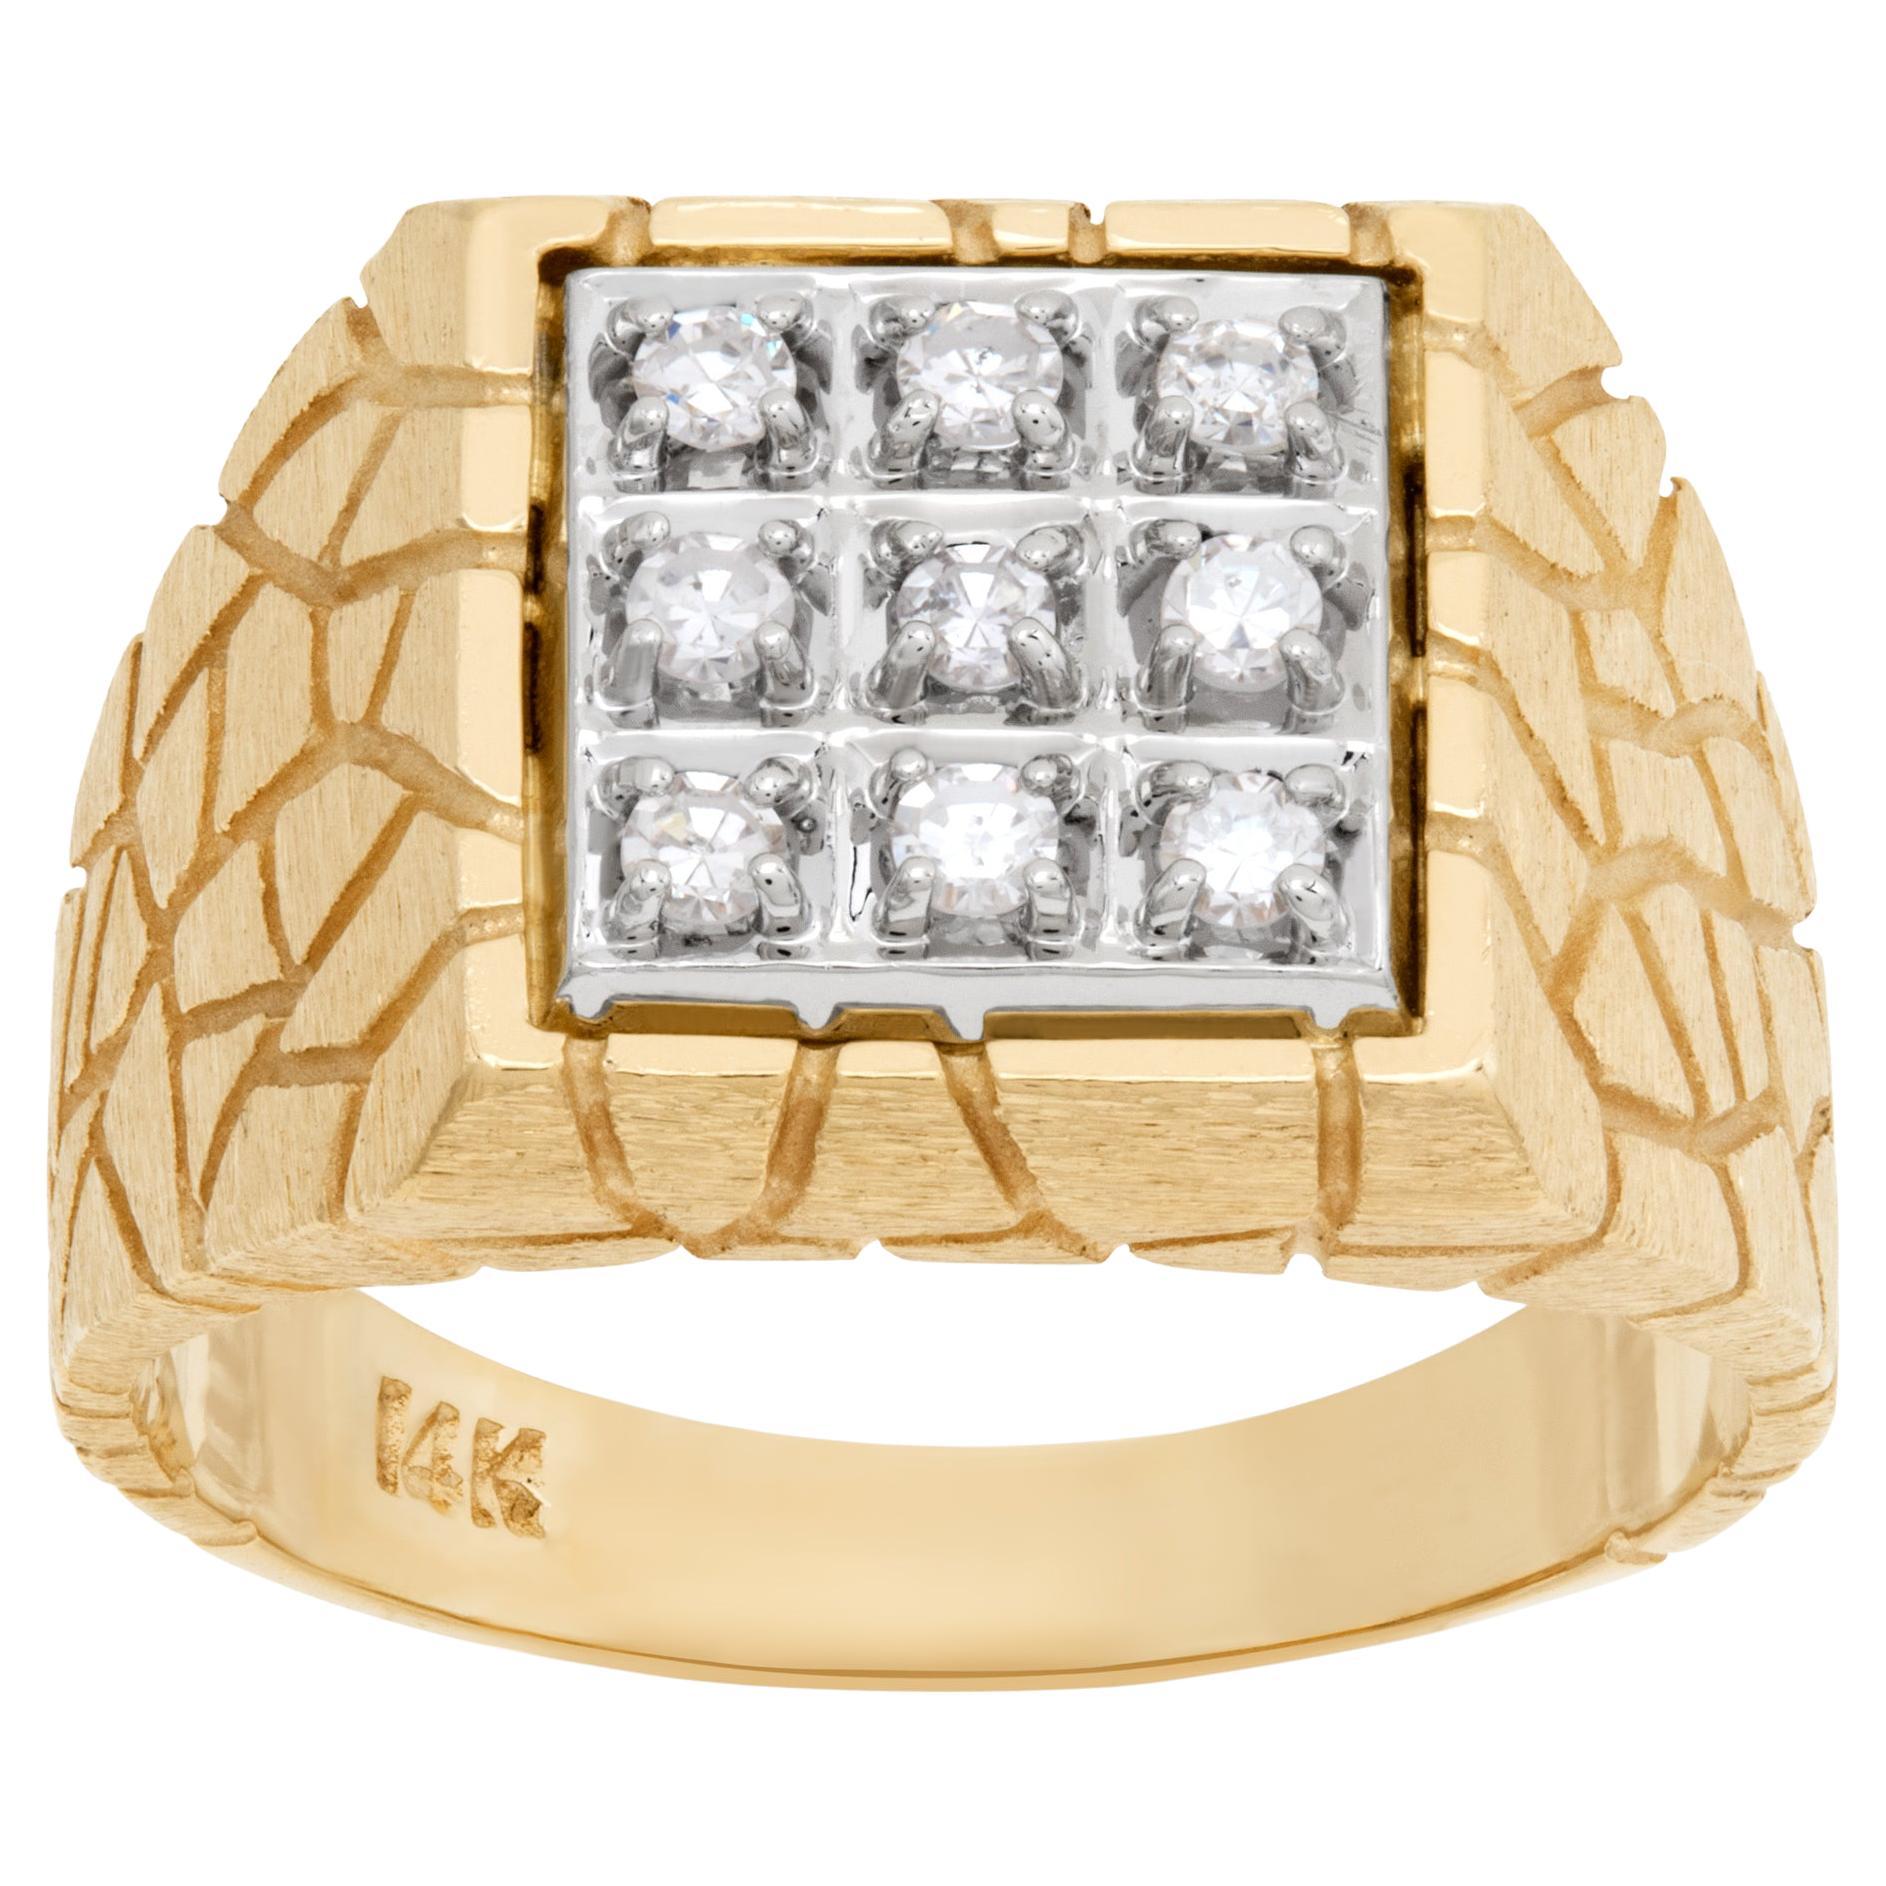 Gents diamond ring set in 14k yellow gold. 0.50 carats in diamonds. 